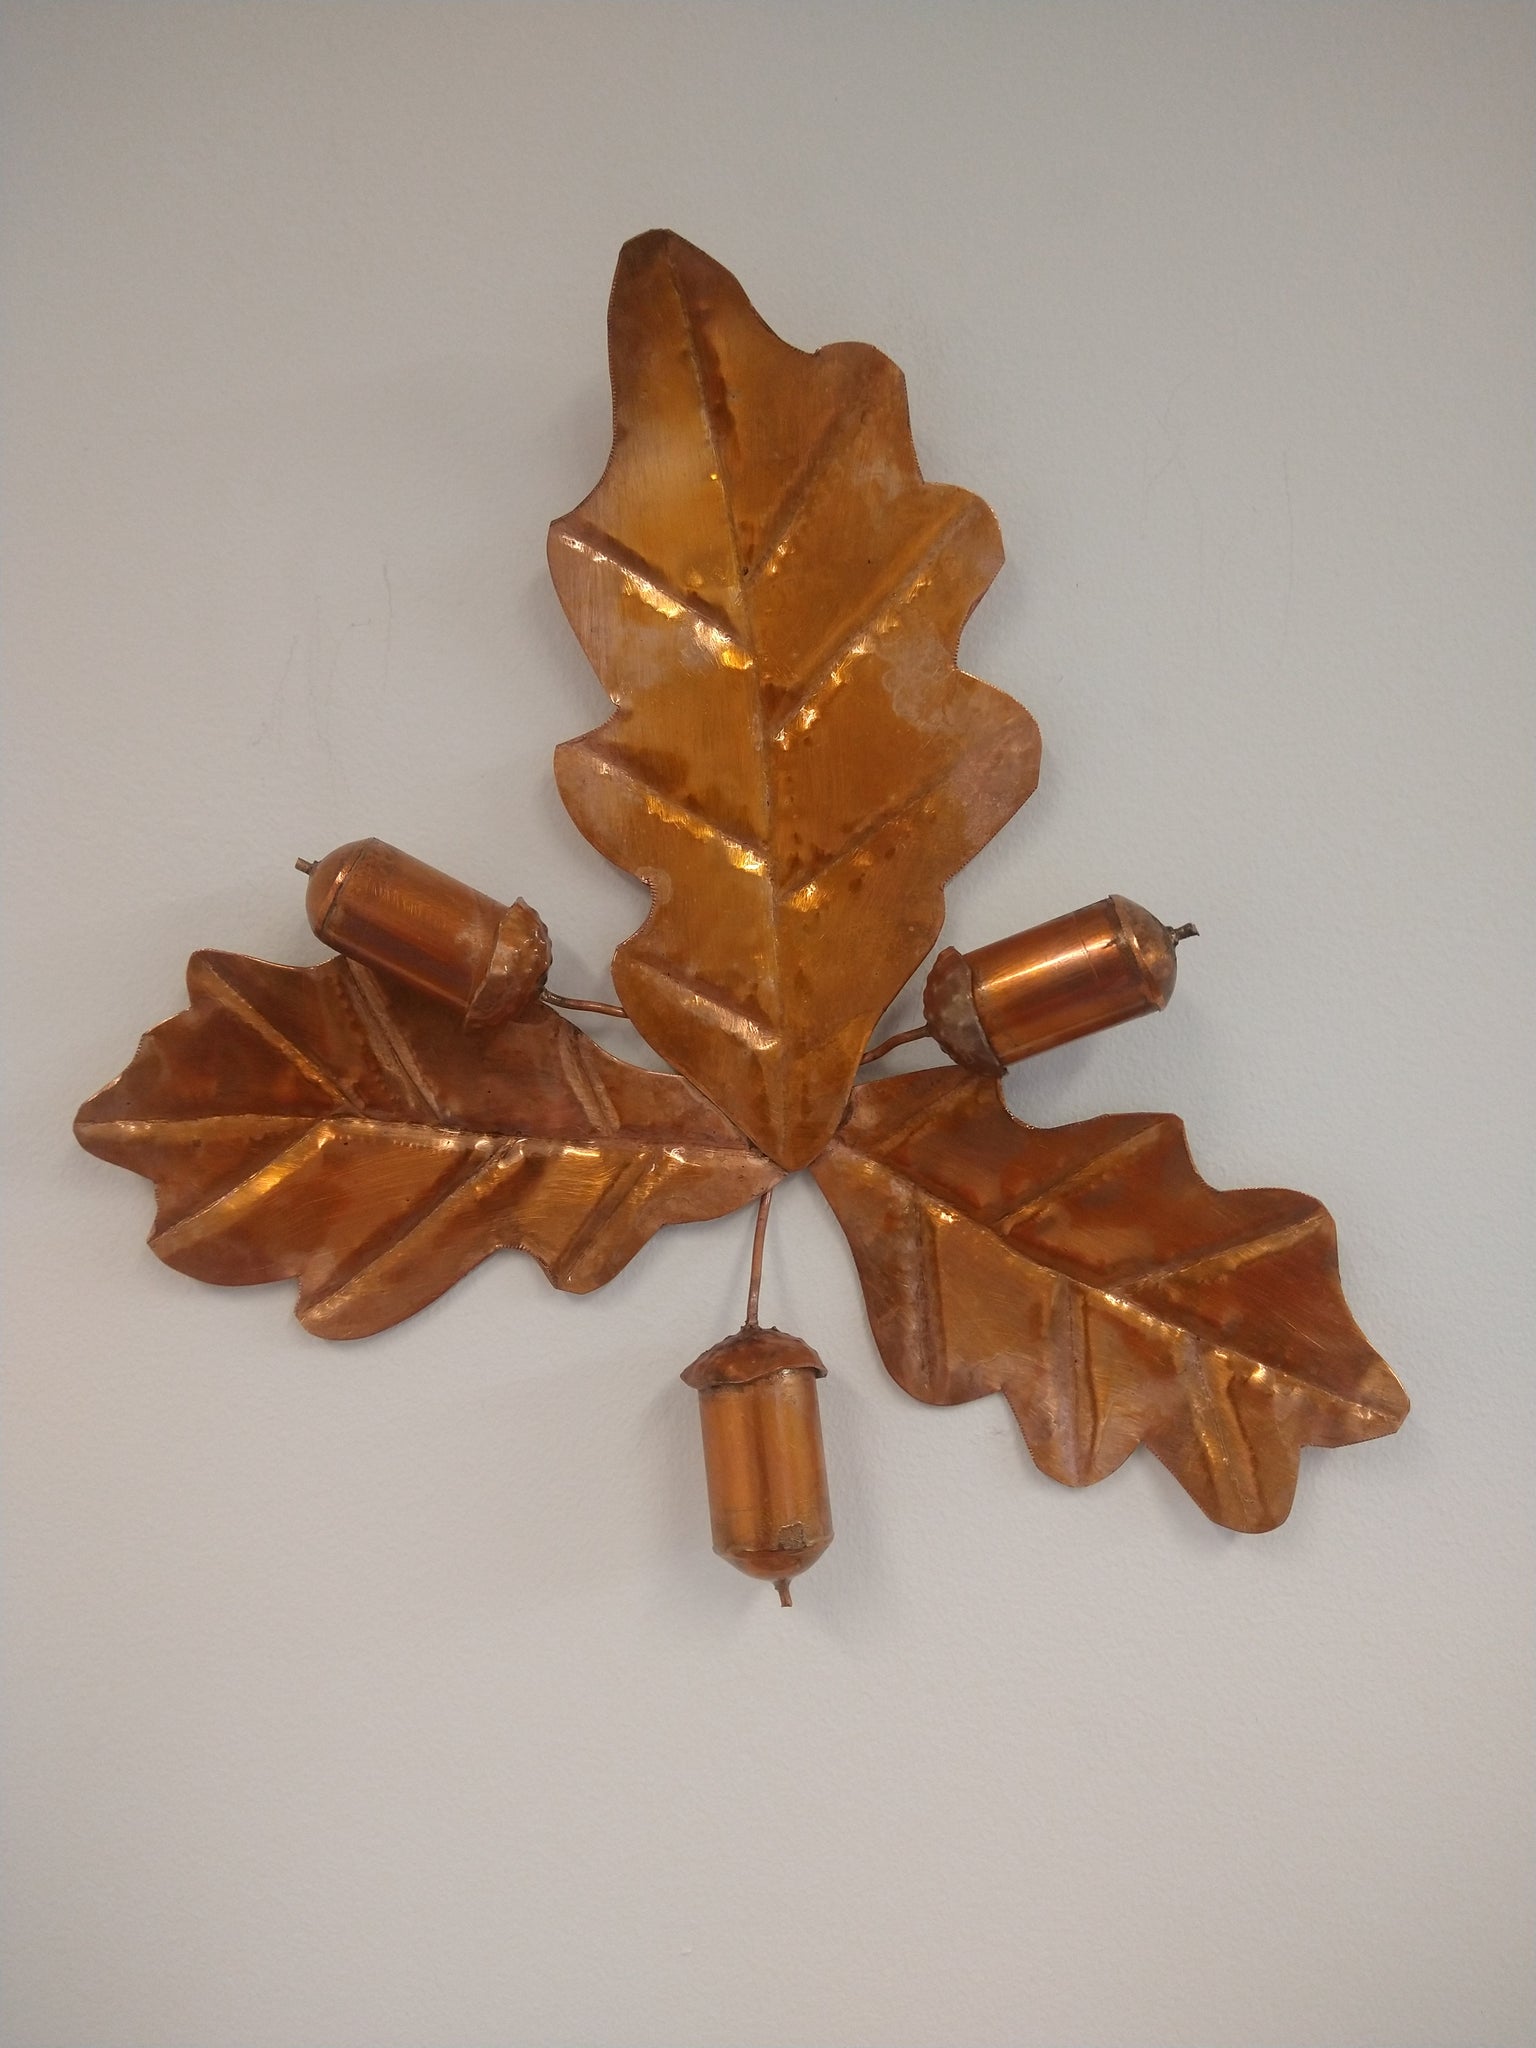 Copper leaves and acorns